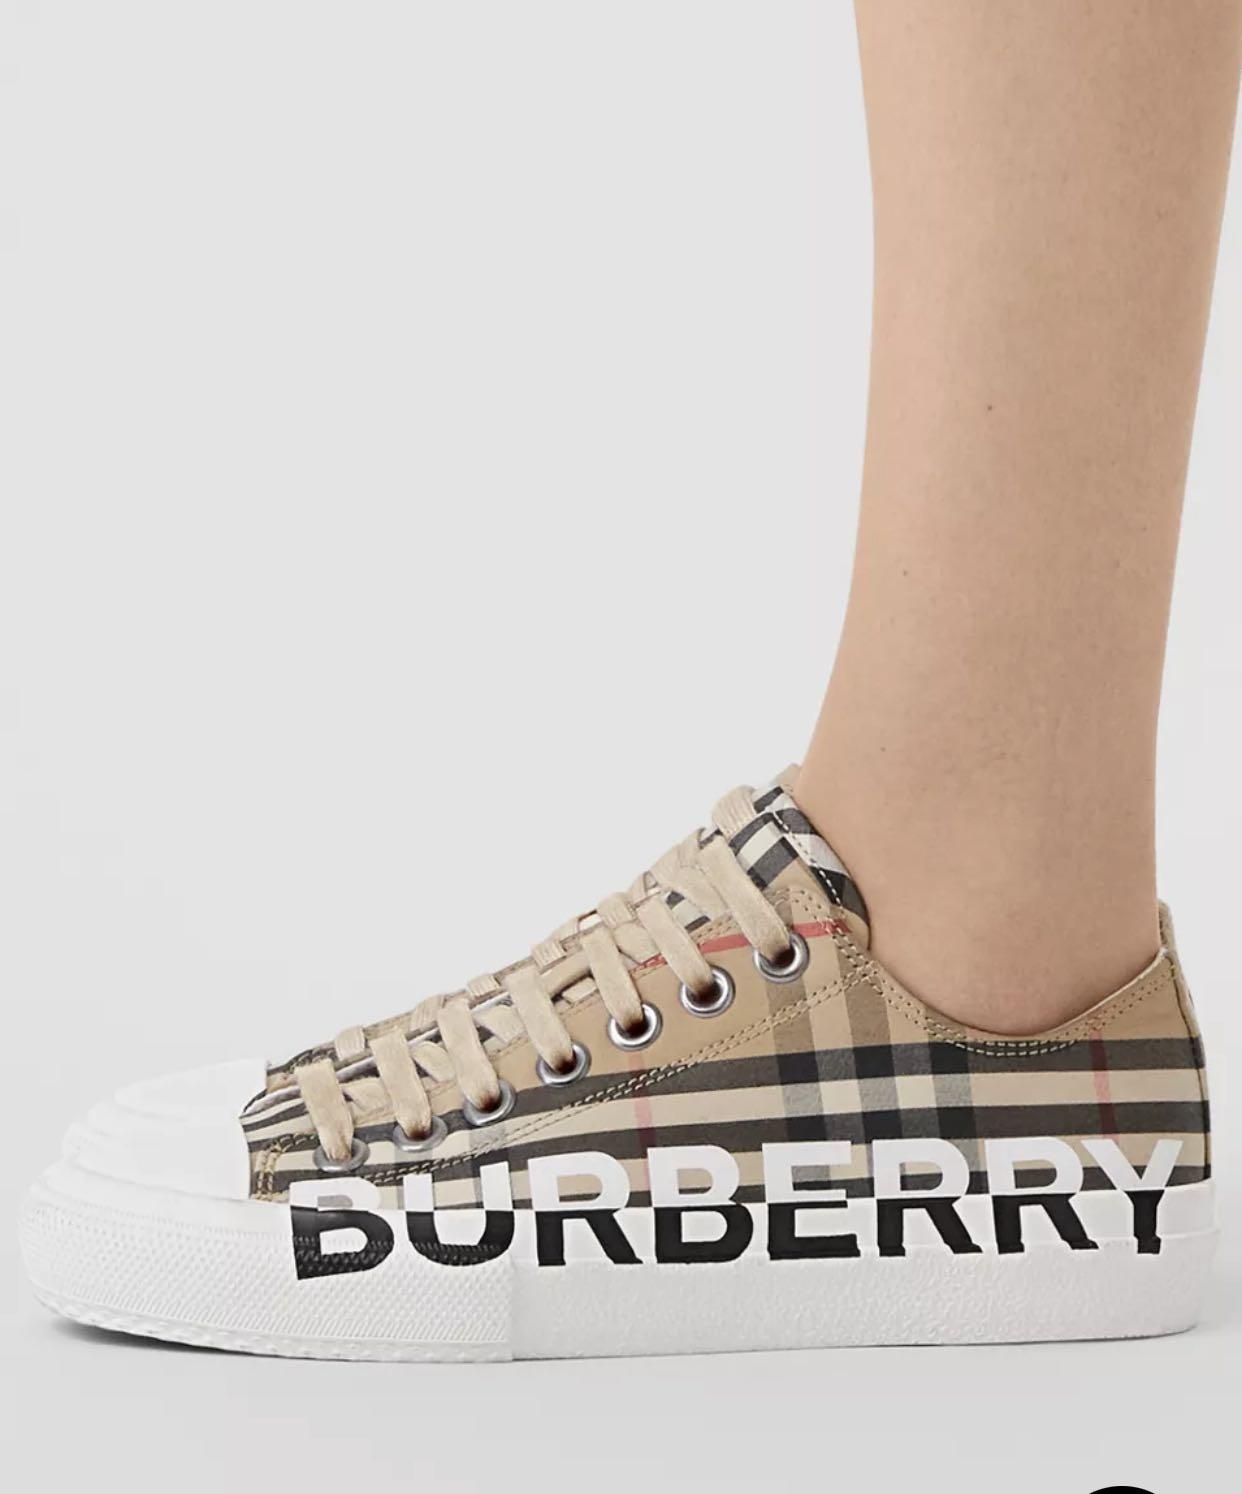 Where to Buy Authentic Burberry Shoes in Singapore